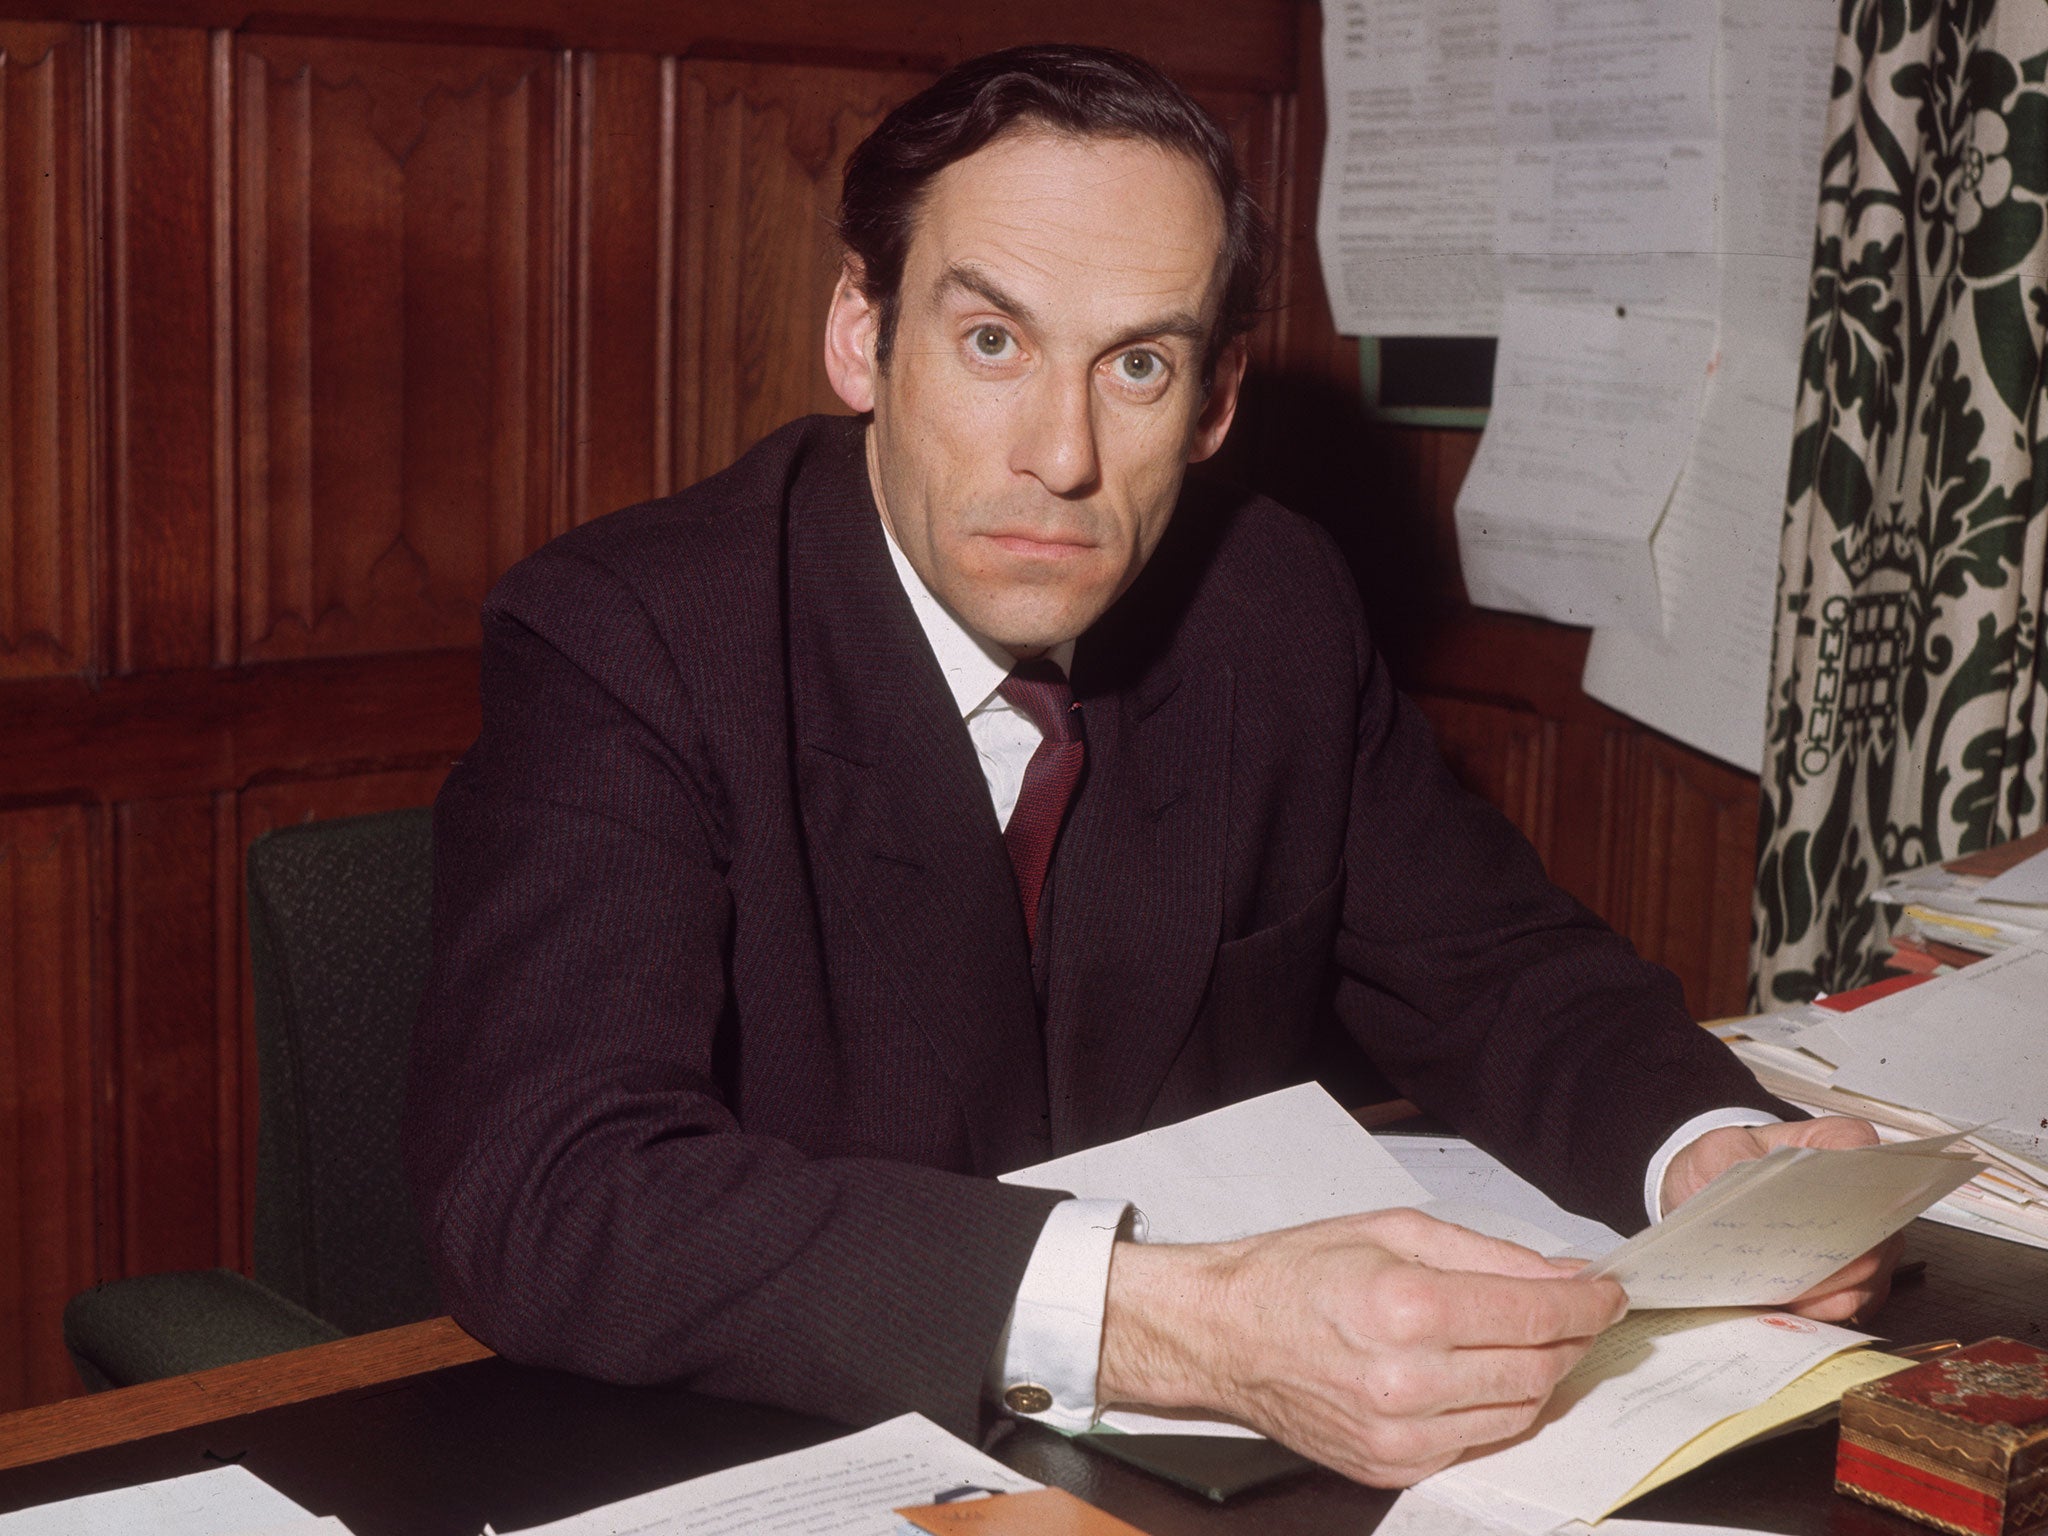 Before the storm: Jeremy Thorpe in his heyday